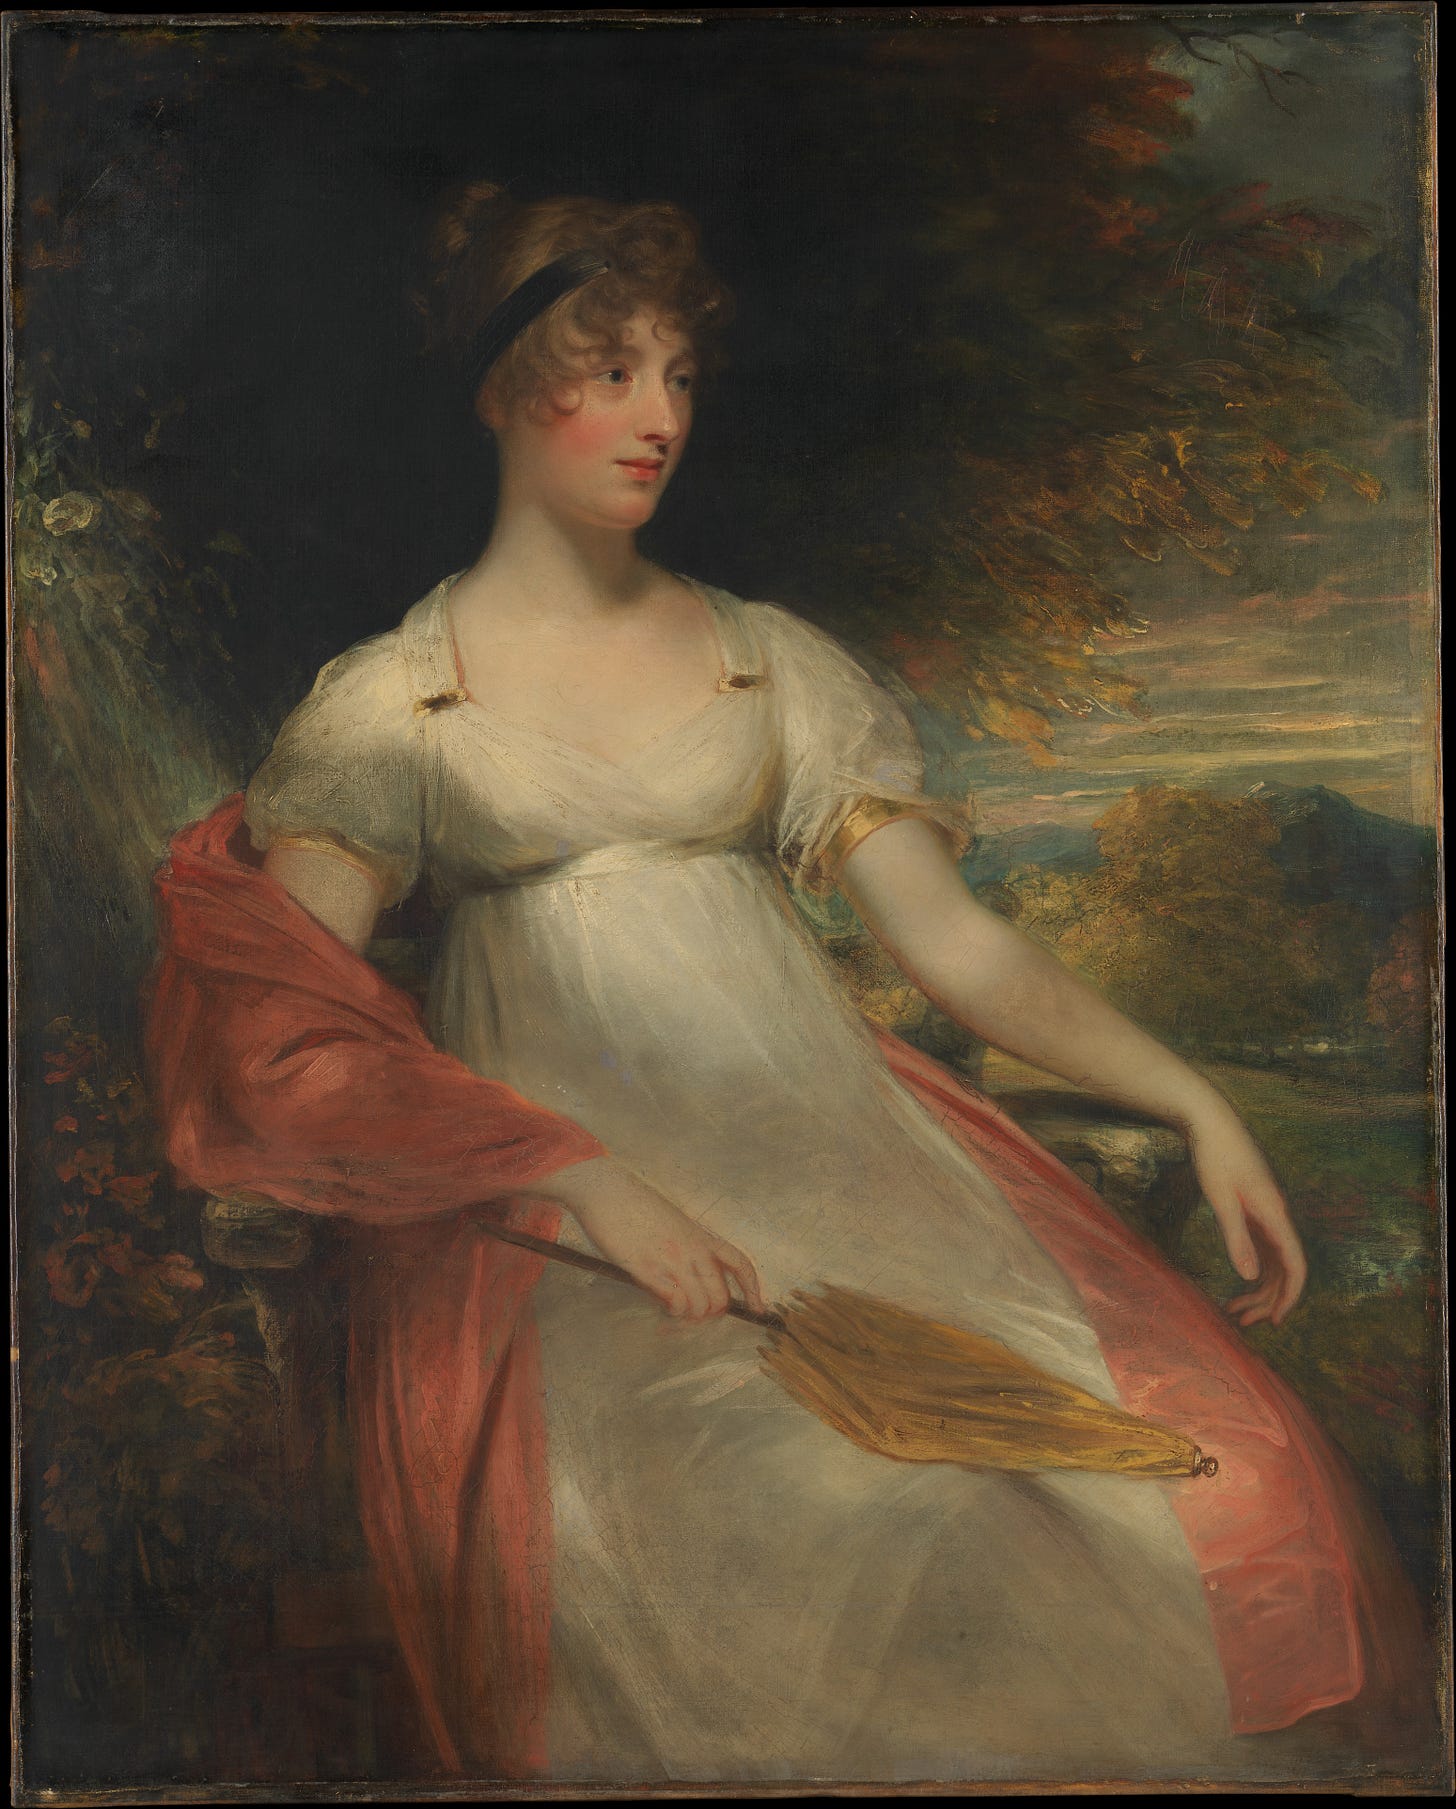 Portrait of a Woman ca. 1805 by Sir William Beechey.